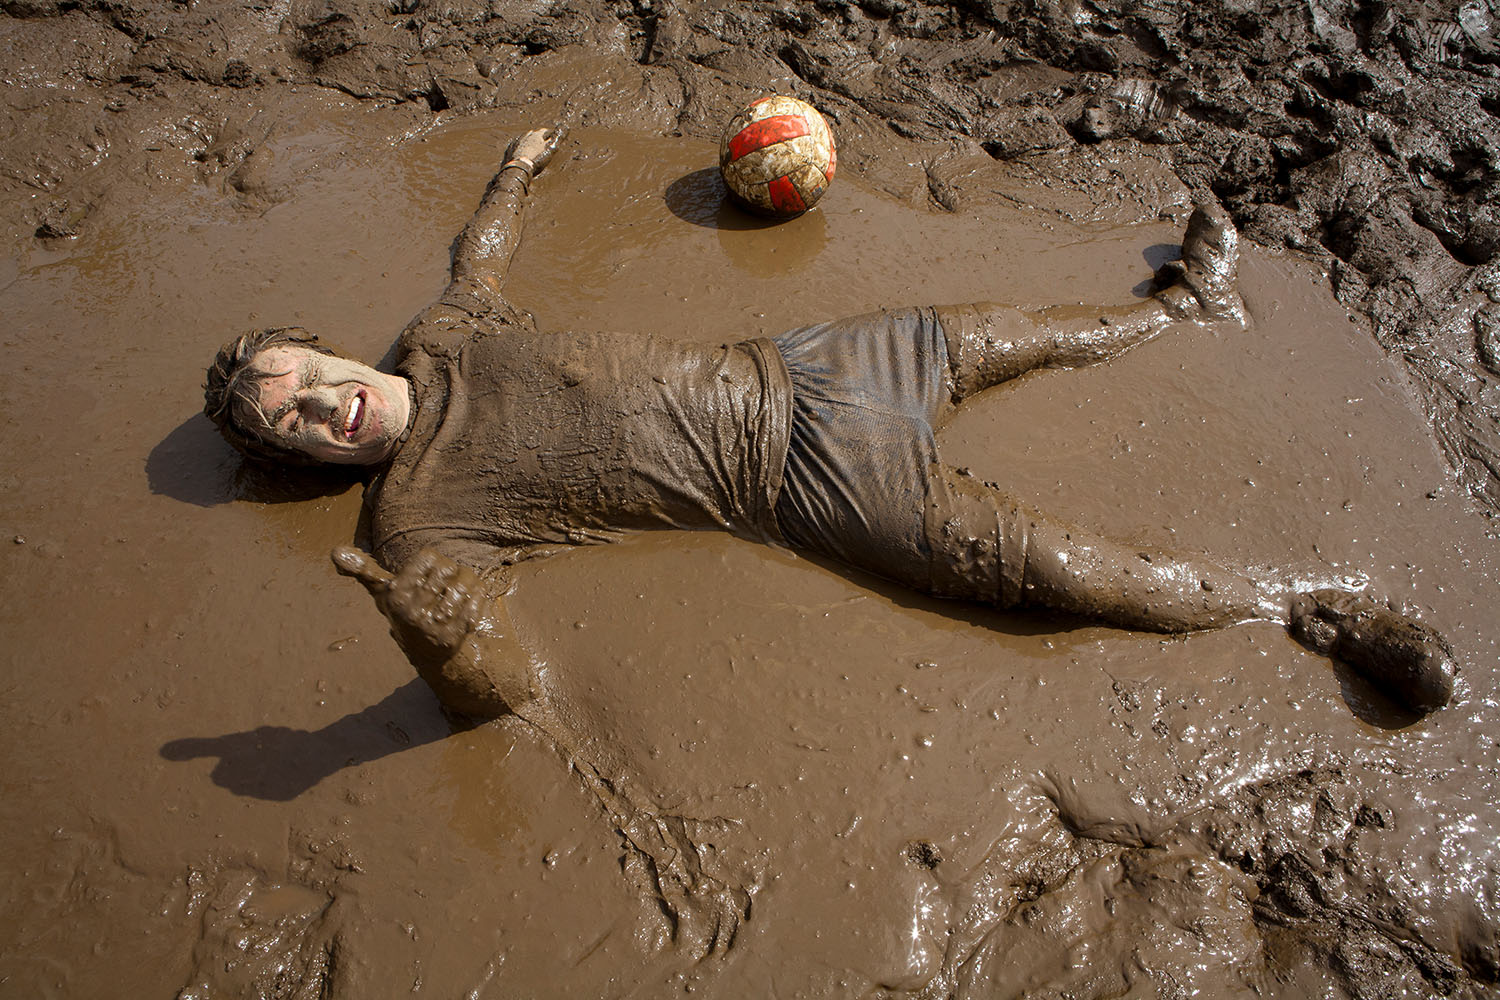 oozeball participant in the deep mud